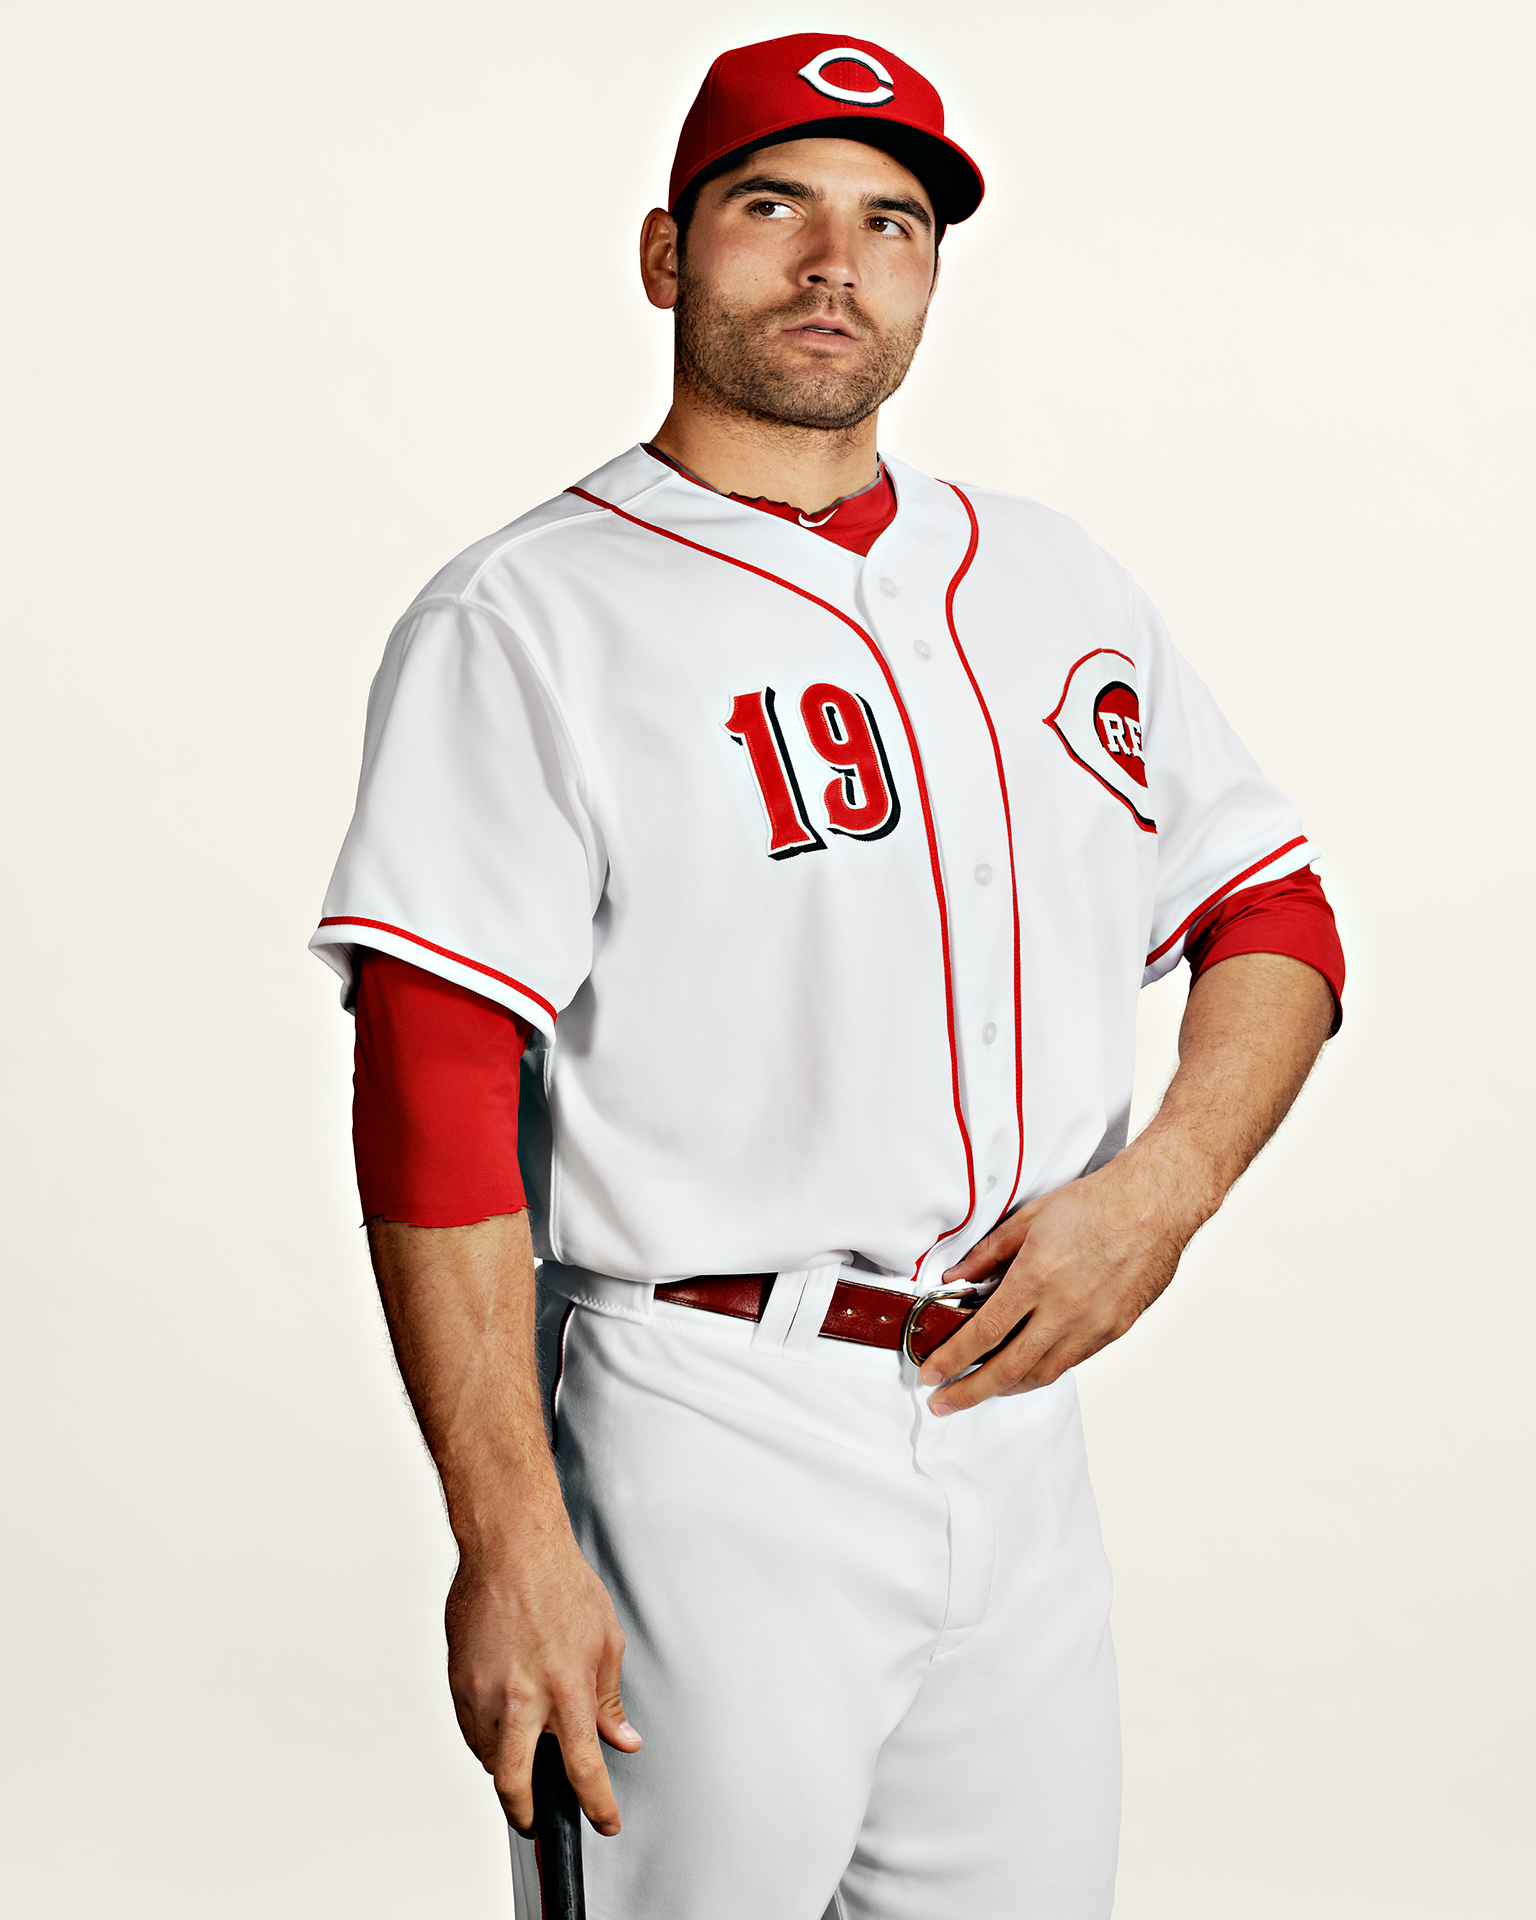 Joey Votto Wallpapers